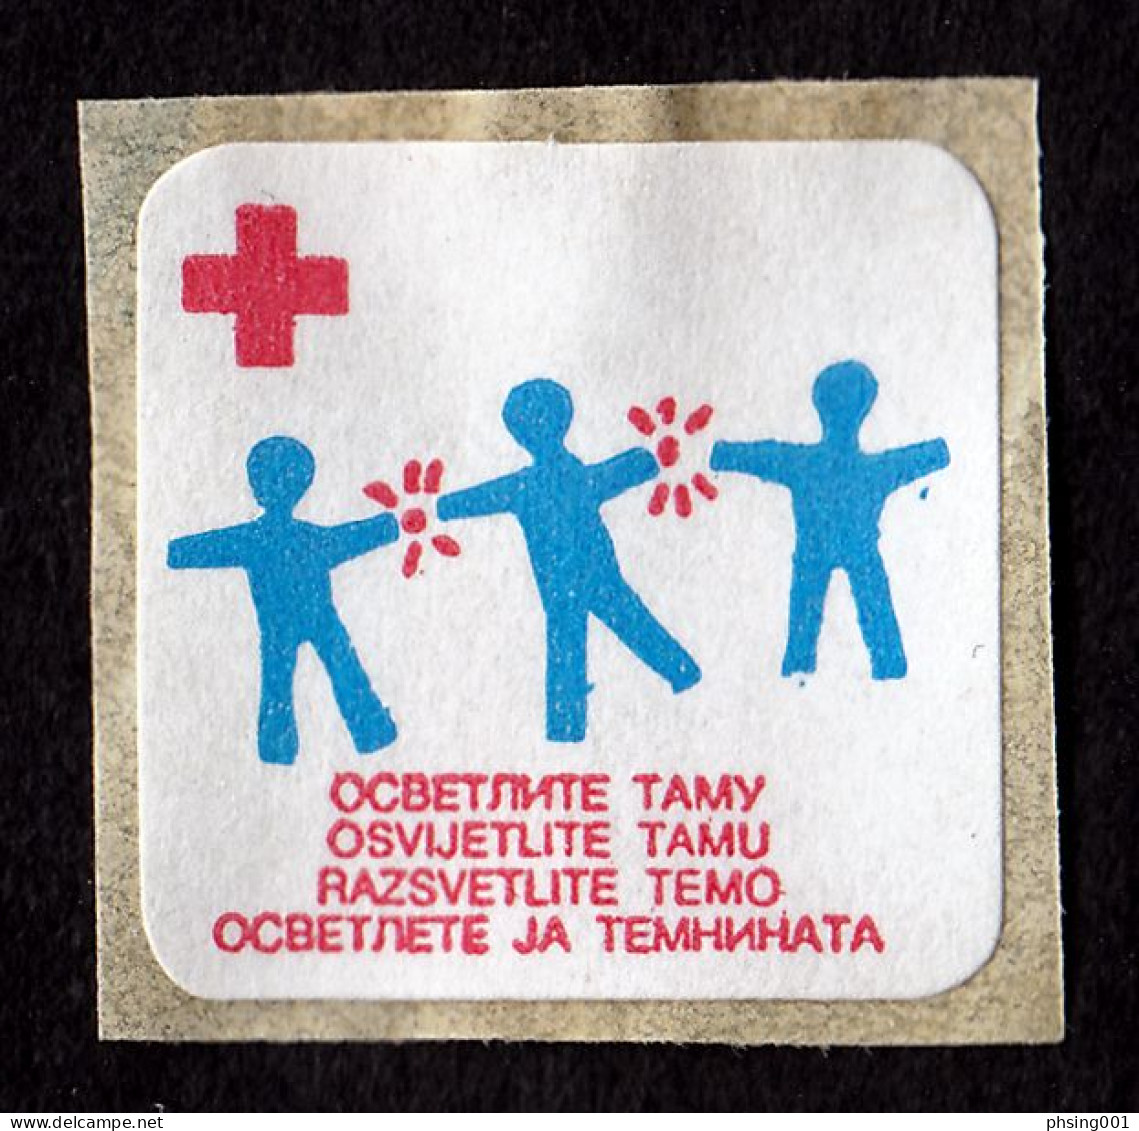 Yugoslavia 1991 Red Cross Croix Rouge Rotes Kreuz Tax Charity Surcharge Self Adhesive Stamp MNH - Impuestos